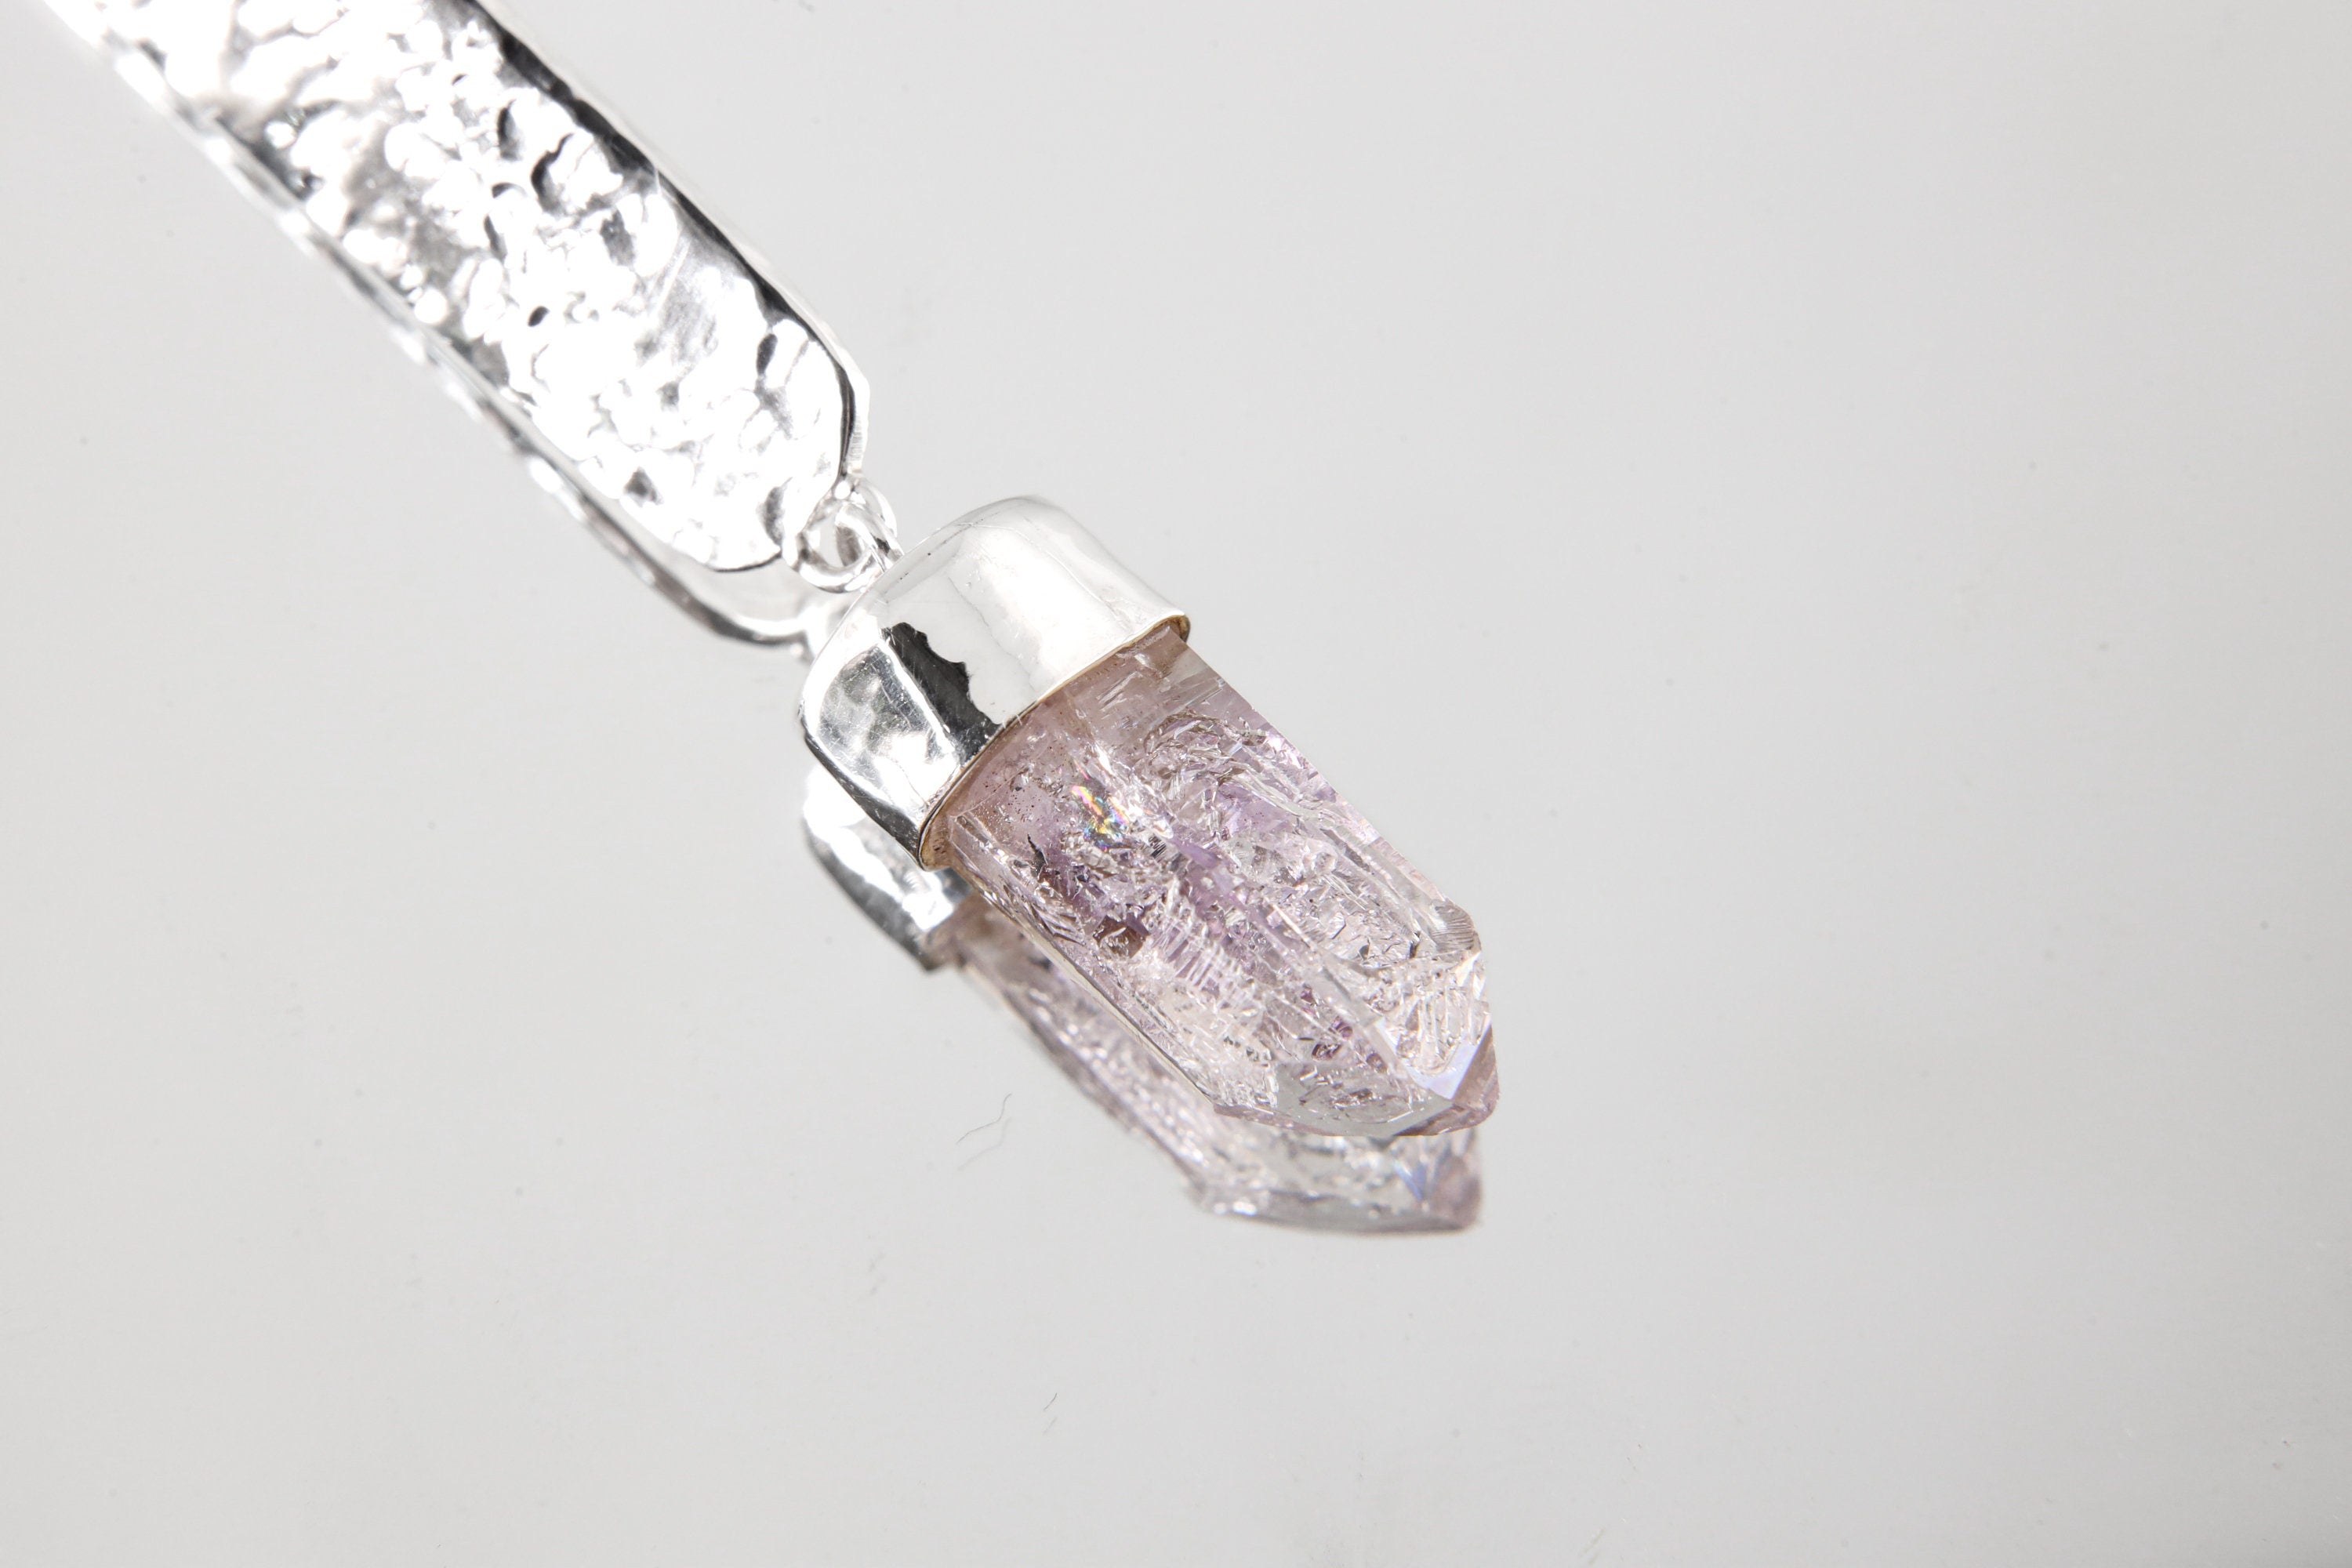 Vera Cruz Amethyst With anhydro Inclusions Pendant - Sterling Silver - Hammer Texture & Shiny Finish